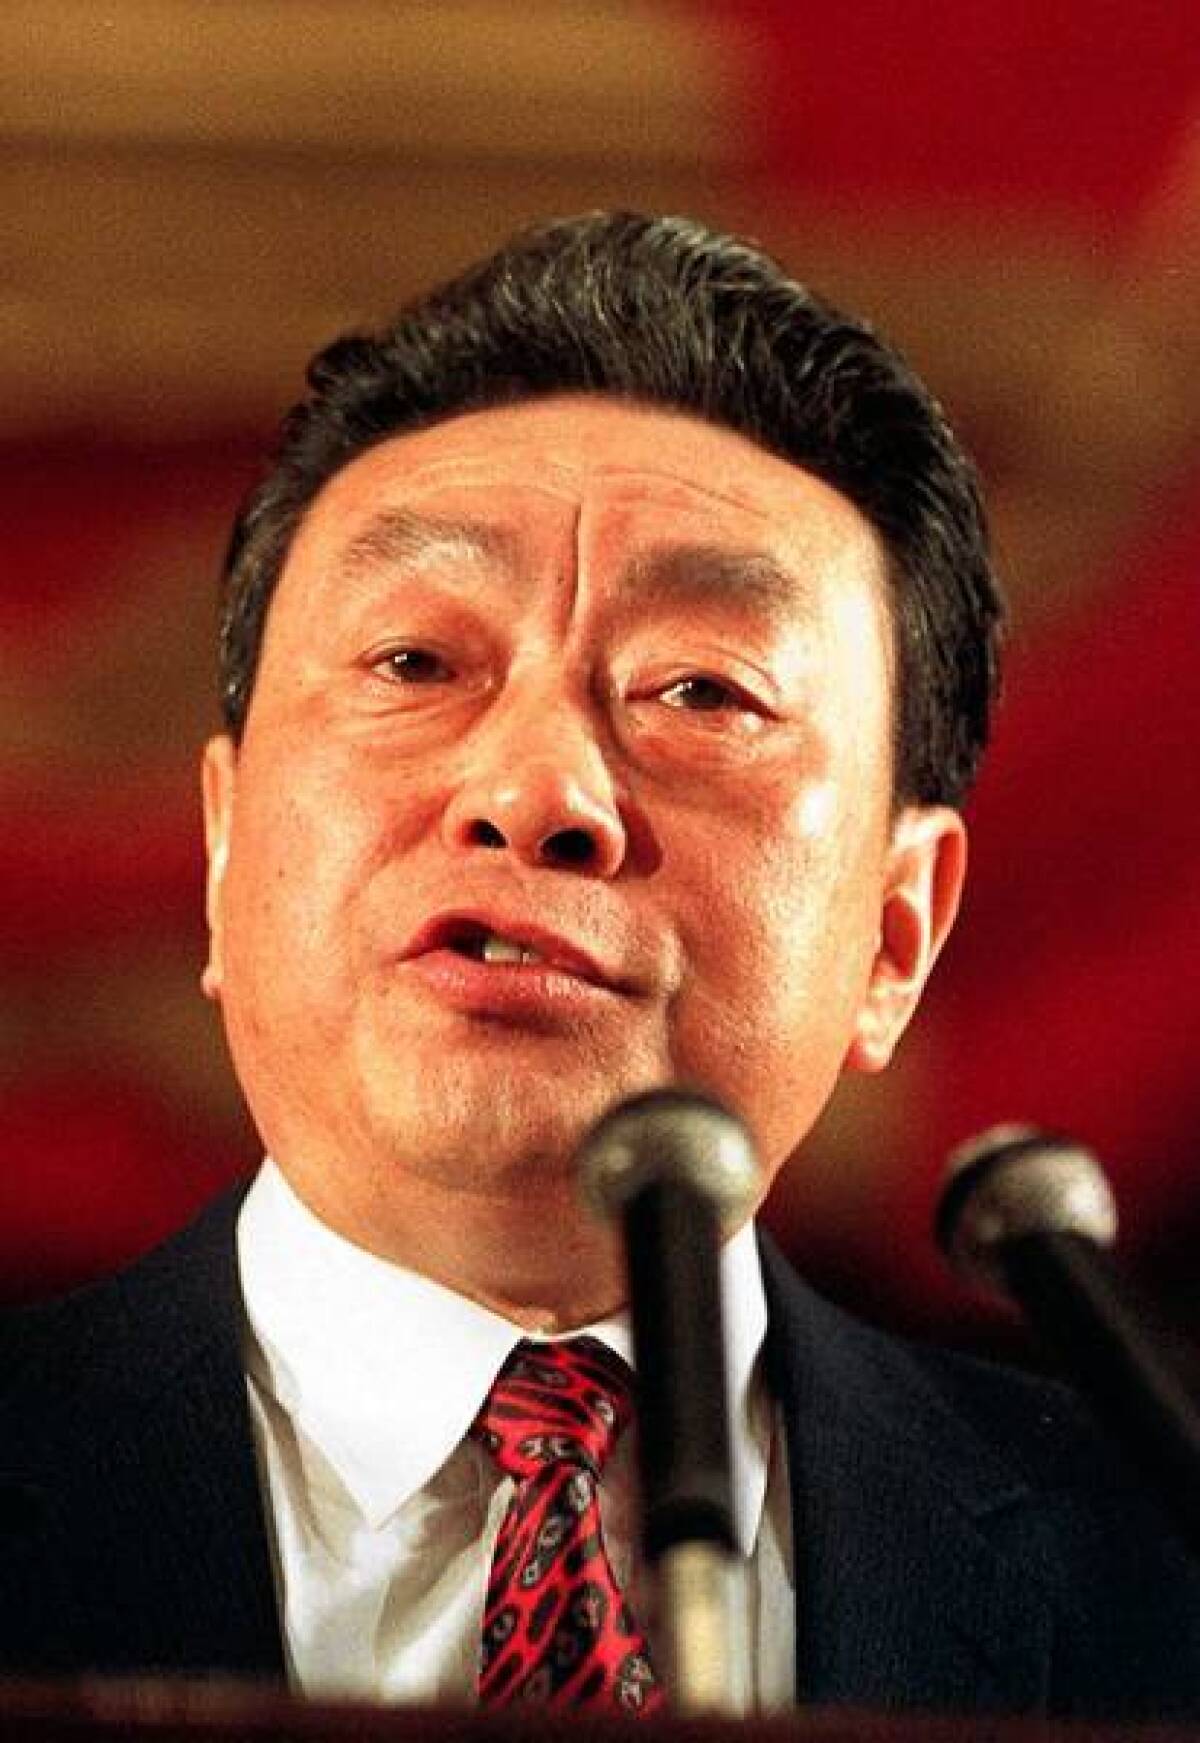 Chen Xitong, former Beijing Communist Party secretary and mayor of Beijing, gives a speech at Beijing's Great Hall of the People in 1993. He was later sentenced to 16 years in prison in a corruption scandal.